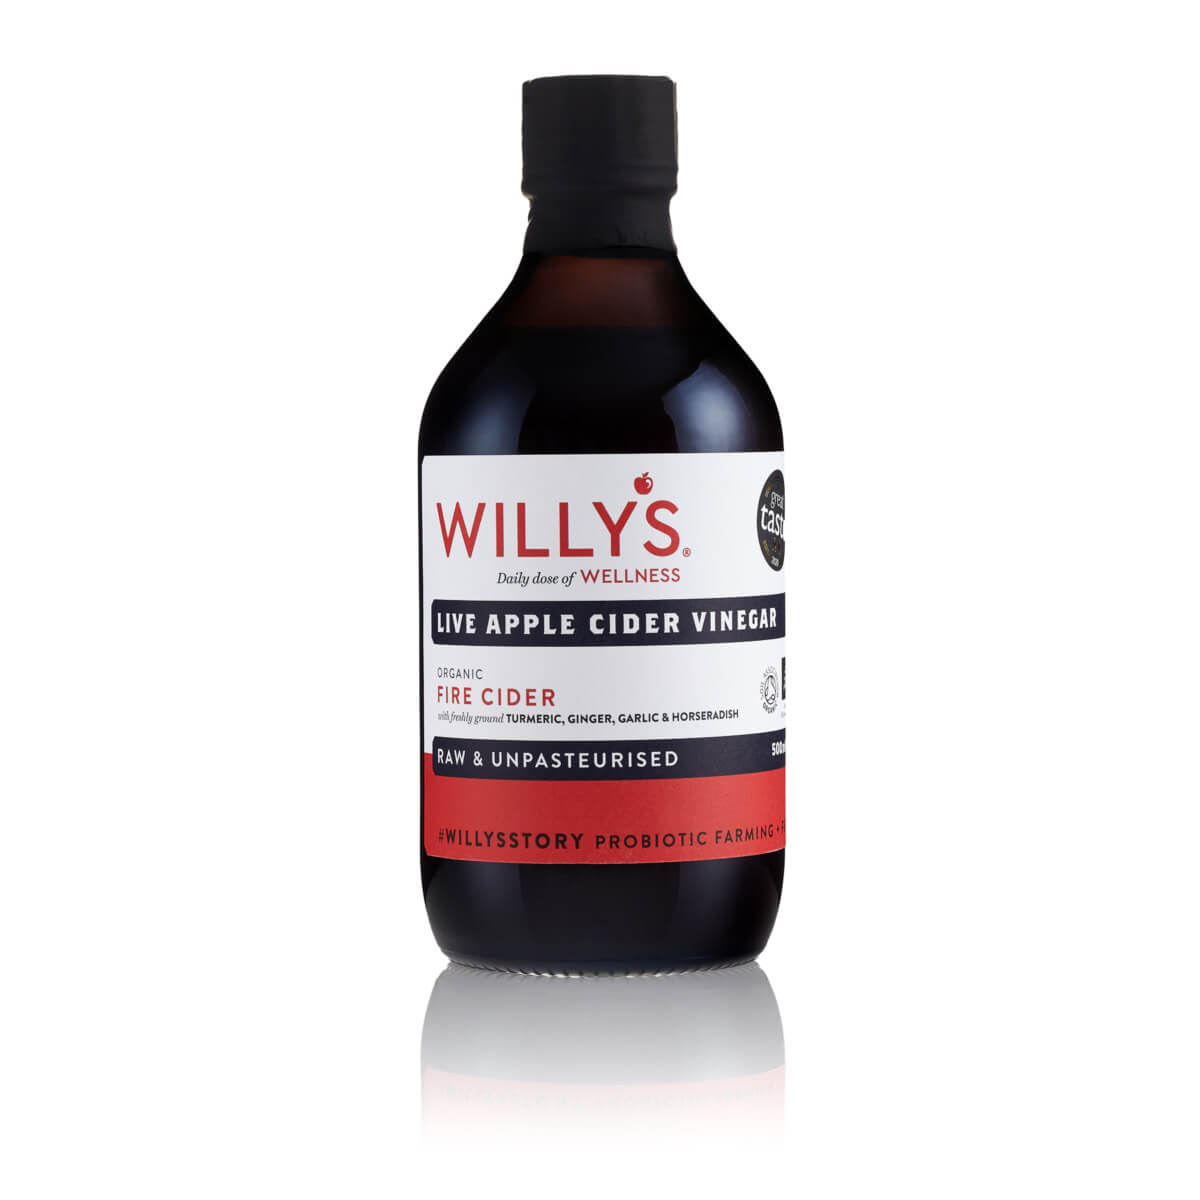 Willy's ACV